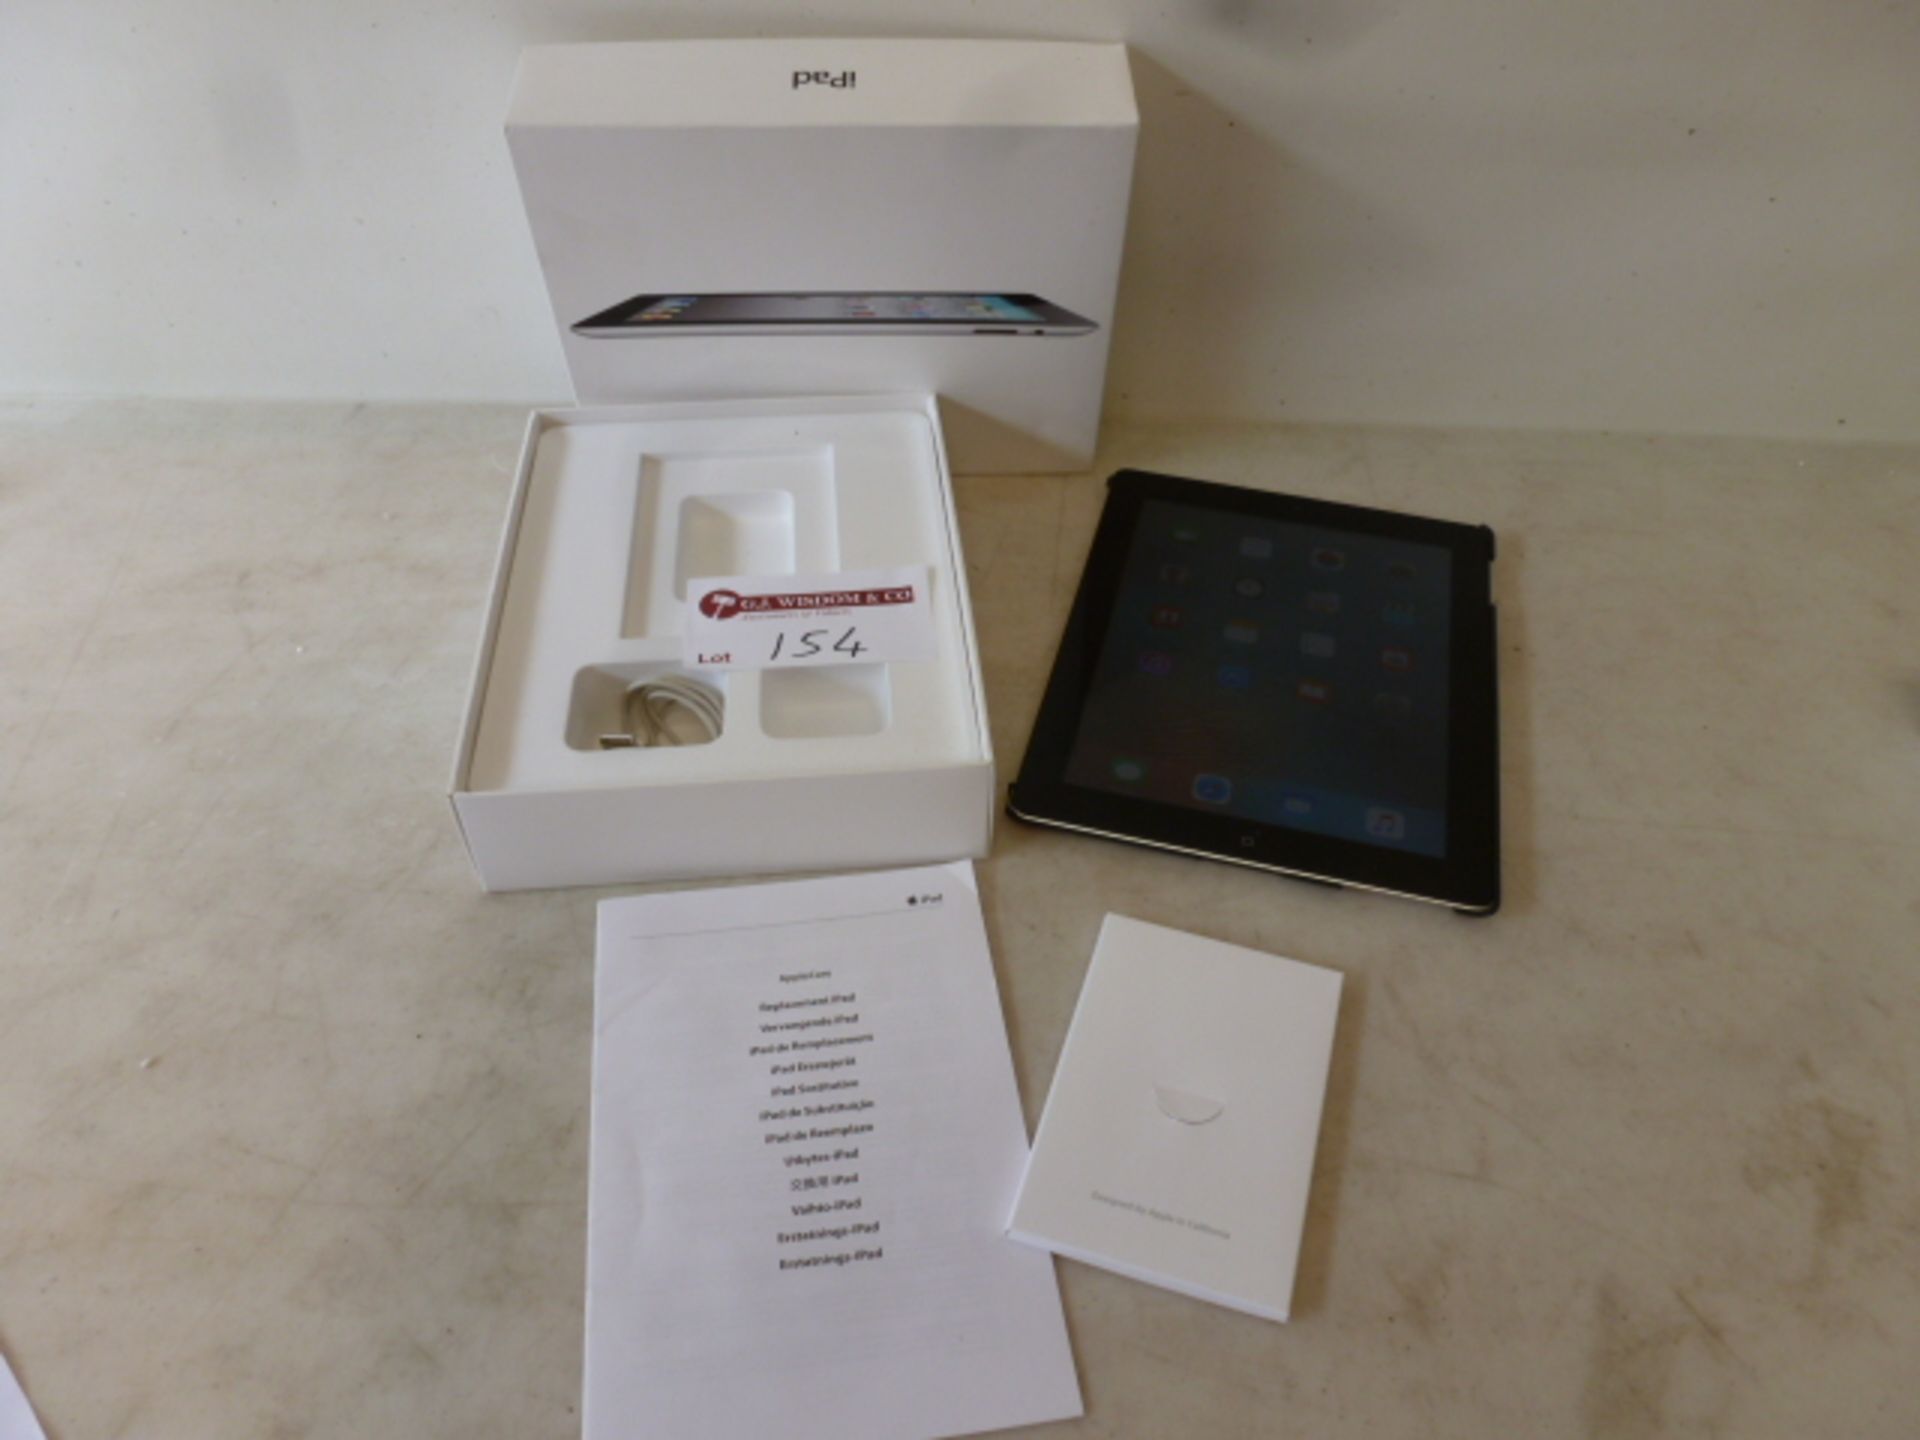 Ipad 2 Model A1396, Wi-Fi 3G, 32GB. Comes with Box & Charger. (Slight Damage to Screen as Viewed/